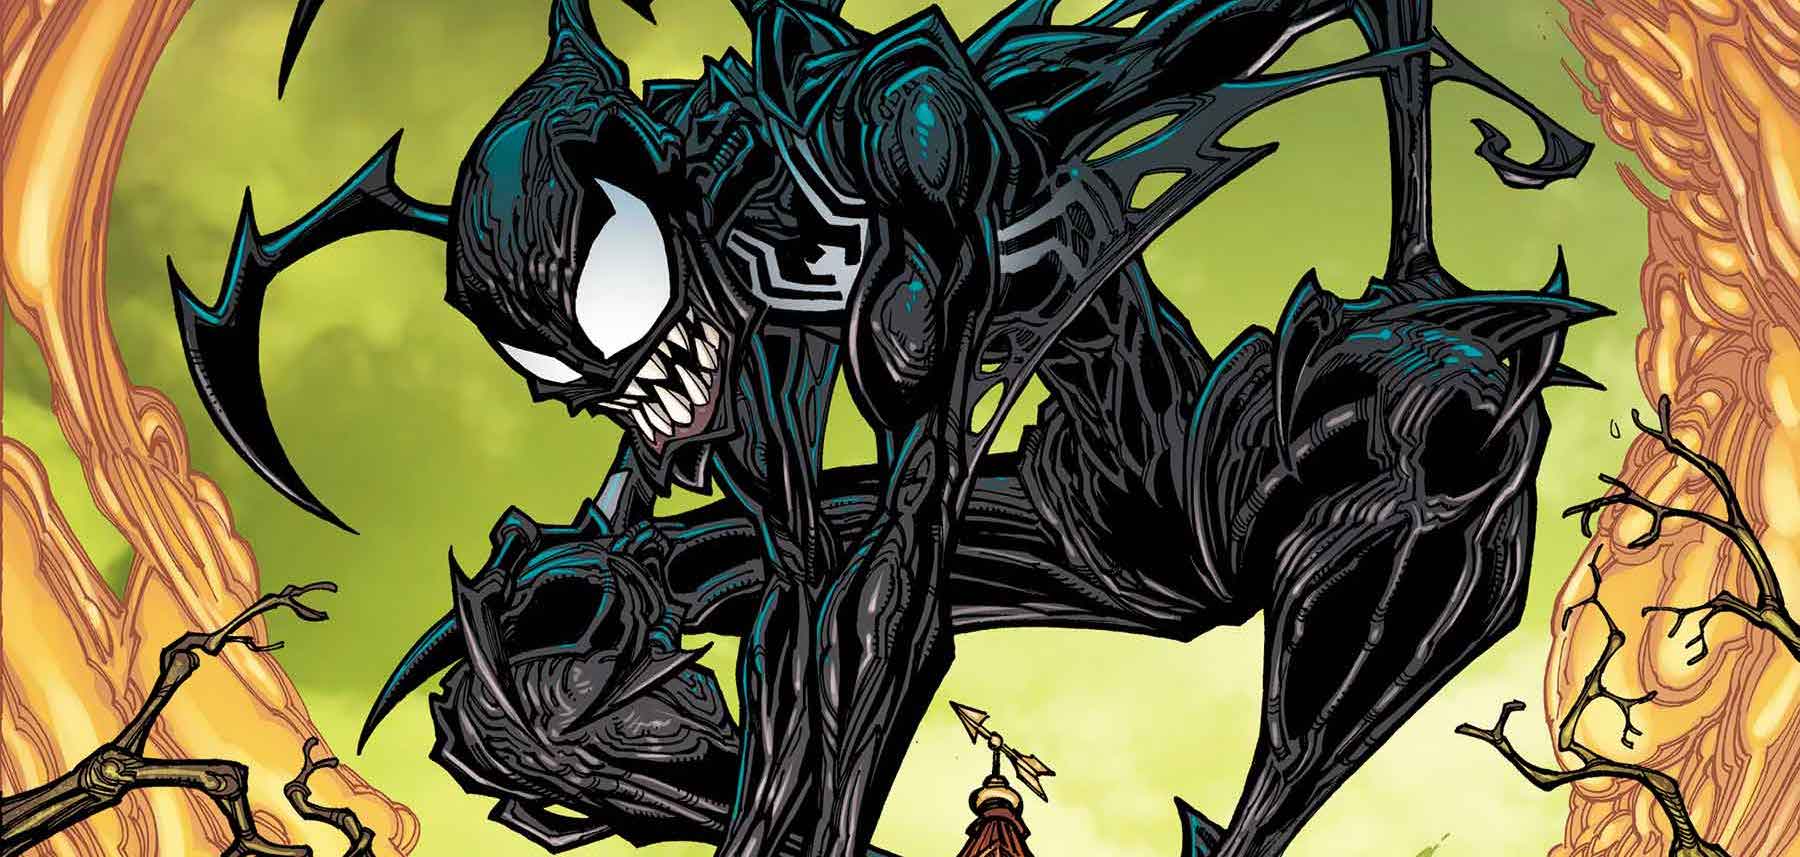 Spooky-Man and Cyborg Spider-Man revealed in 'Edge of Spider-Verse' #2